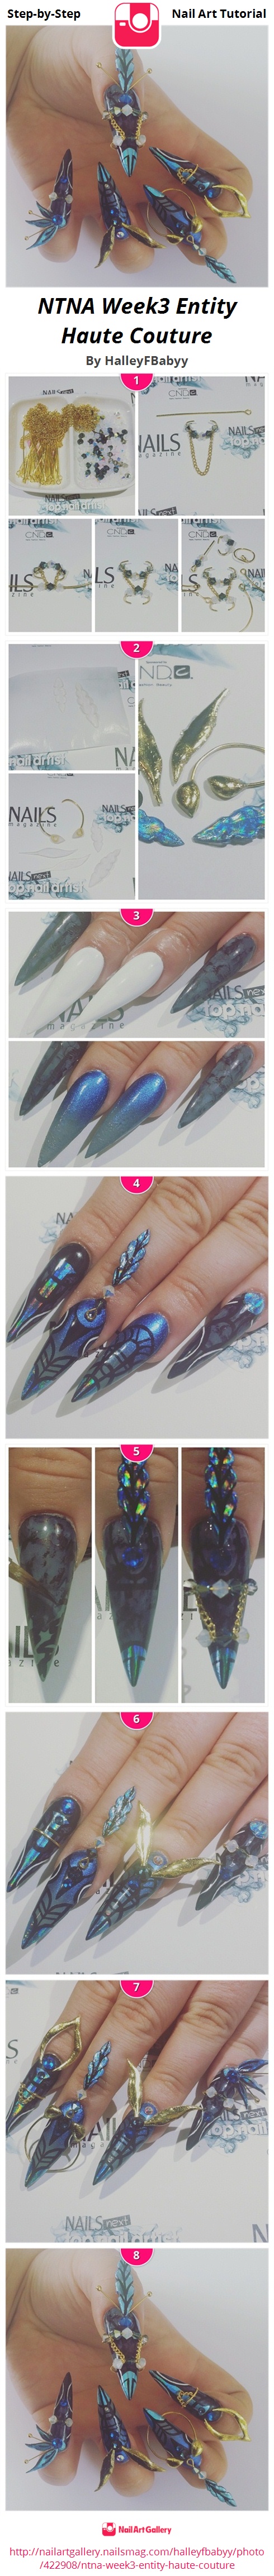 NTNA Week3 Entity Haute Couture - Nail Art Gallery